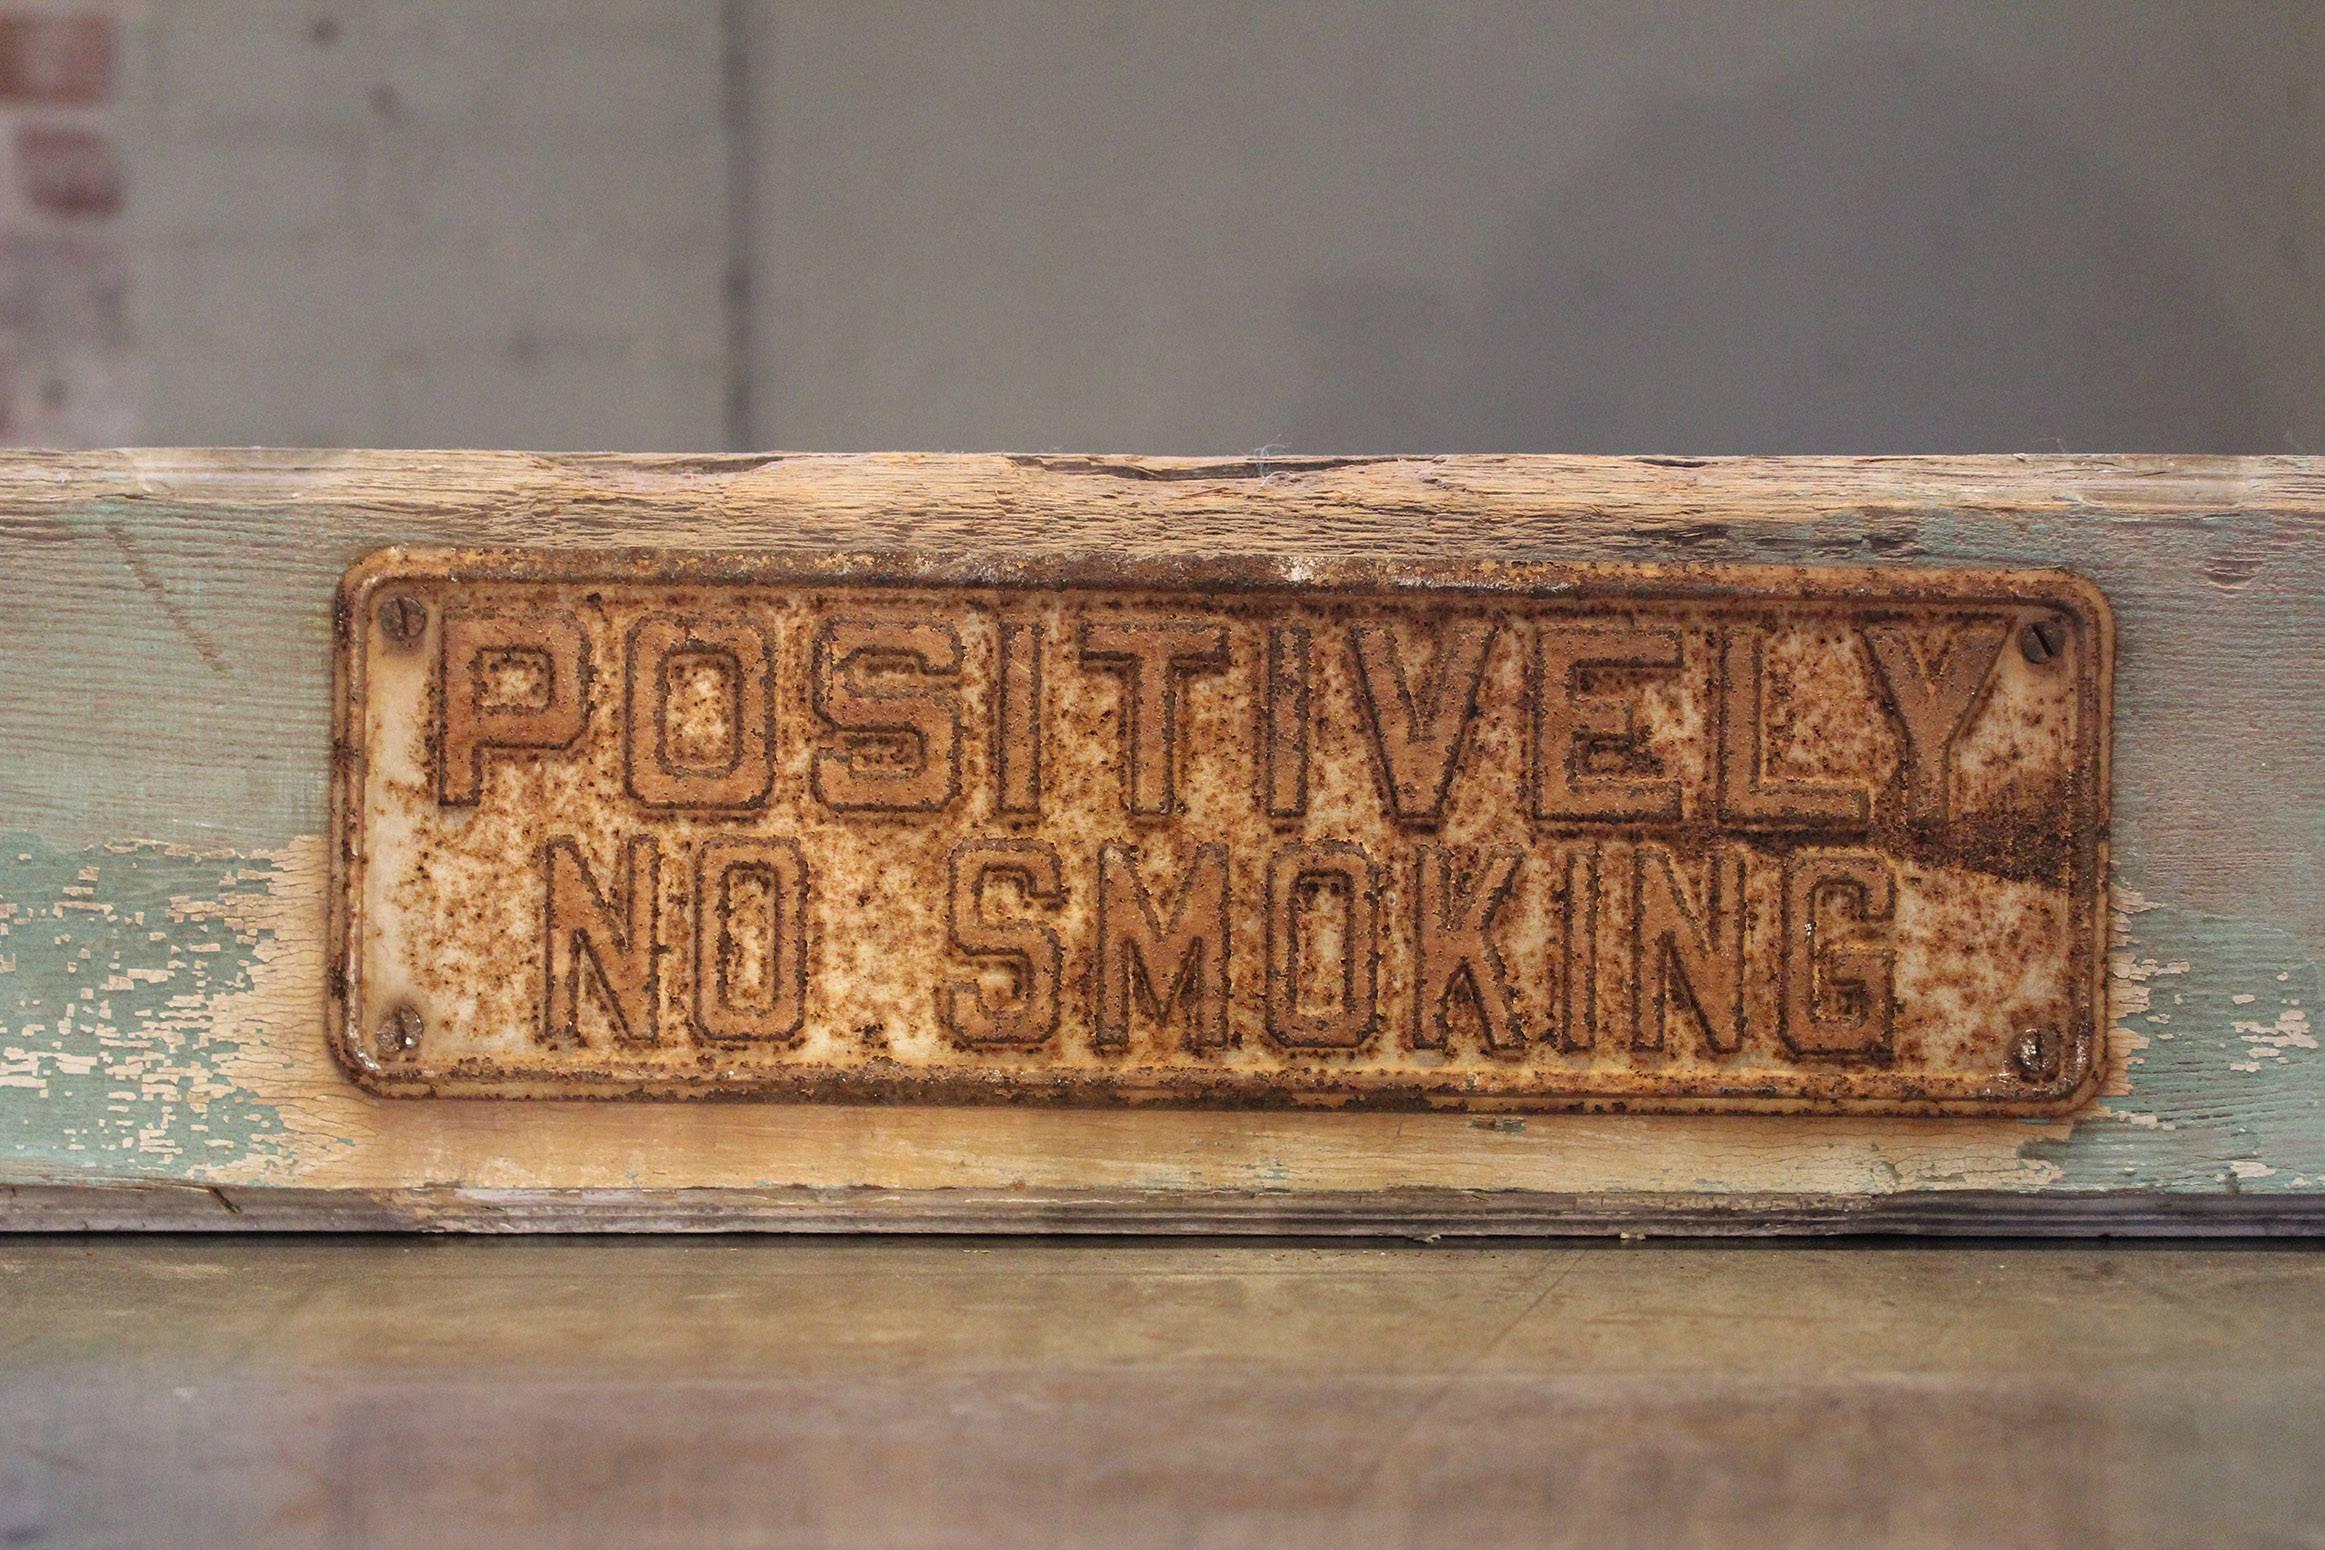 American POSITIVELY NO SMOKING Vintage Metal Sign on Painted Wood Block